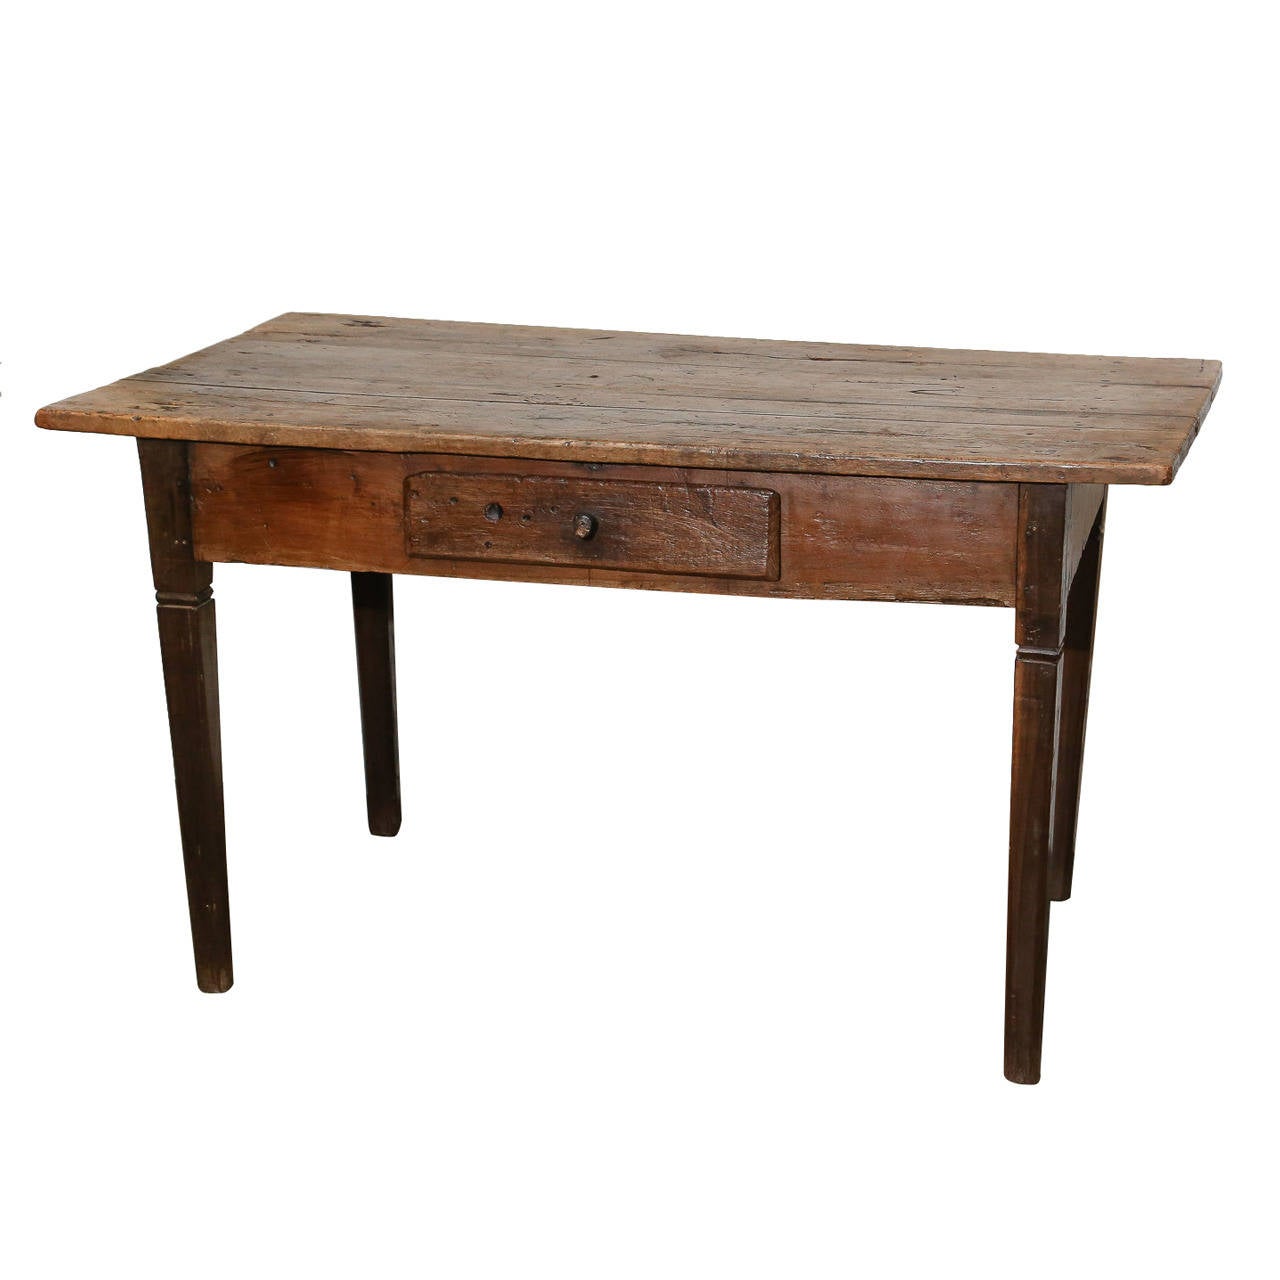 French farmhouse worktable, late 19th century